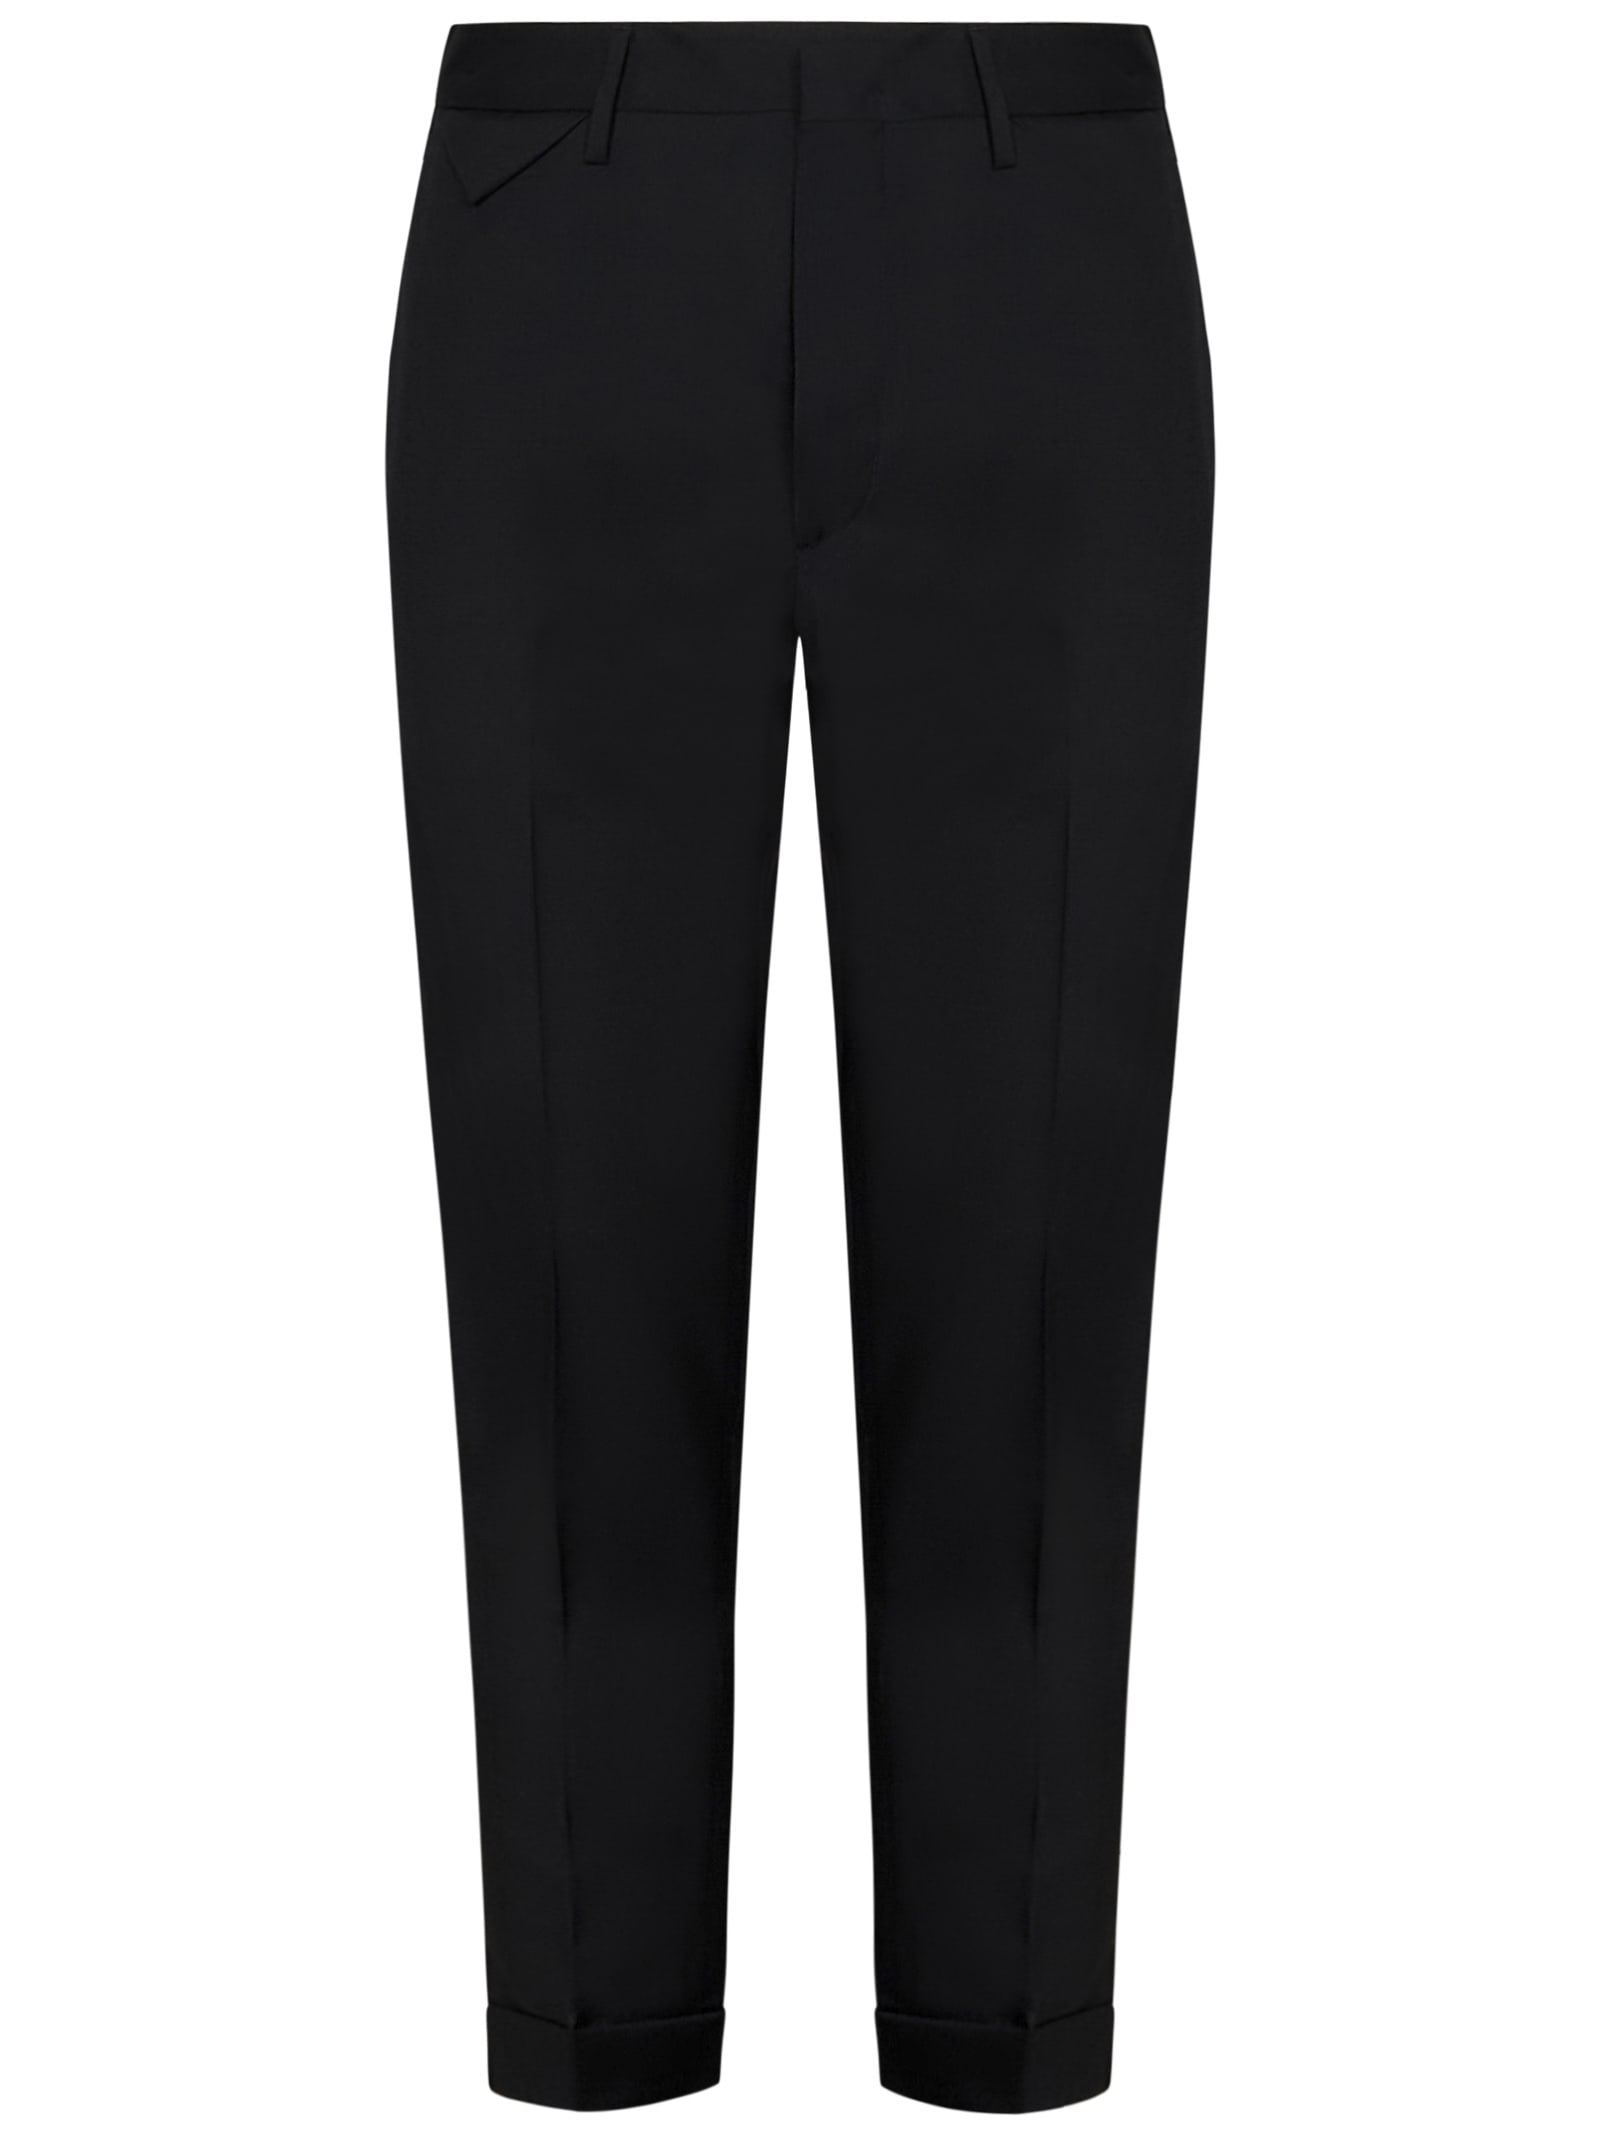 Cooper T1.7 Trousers